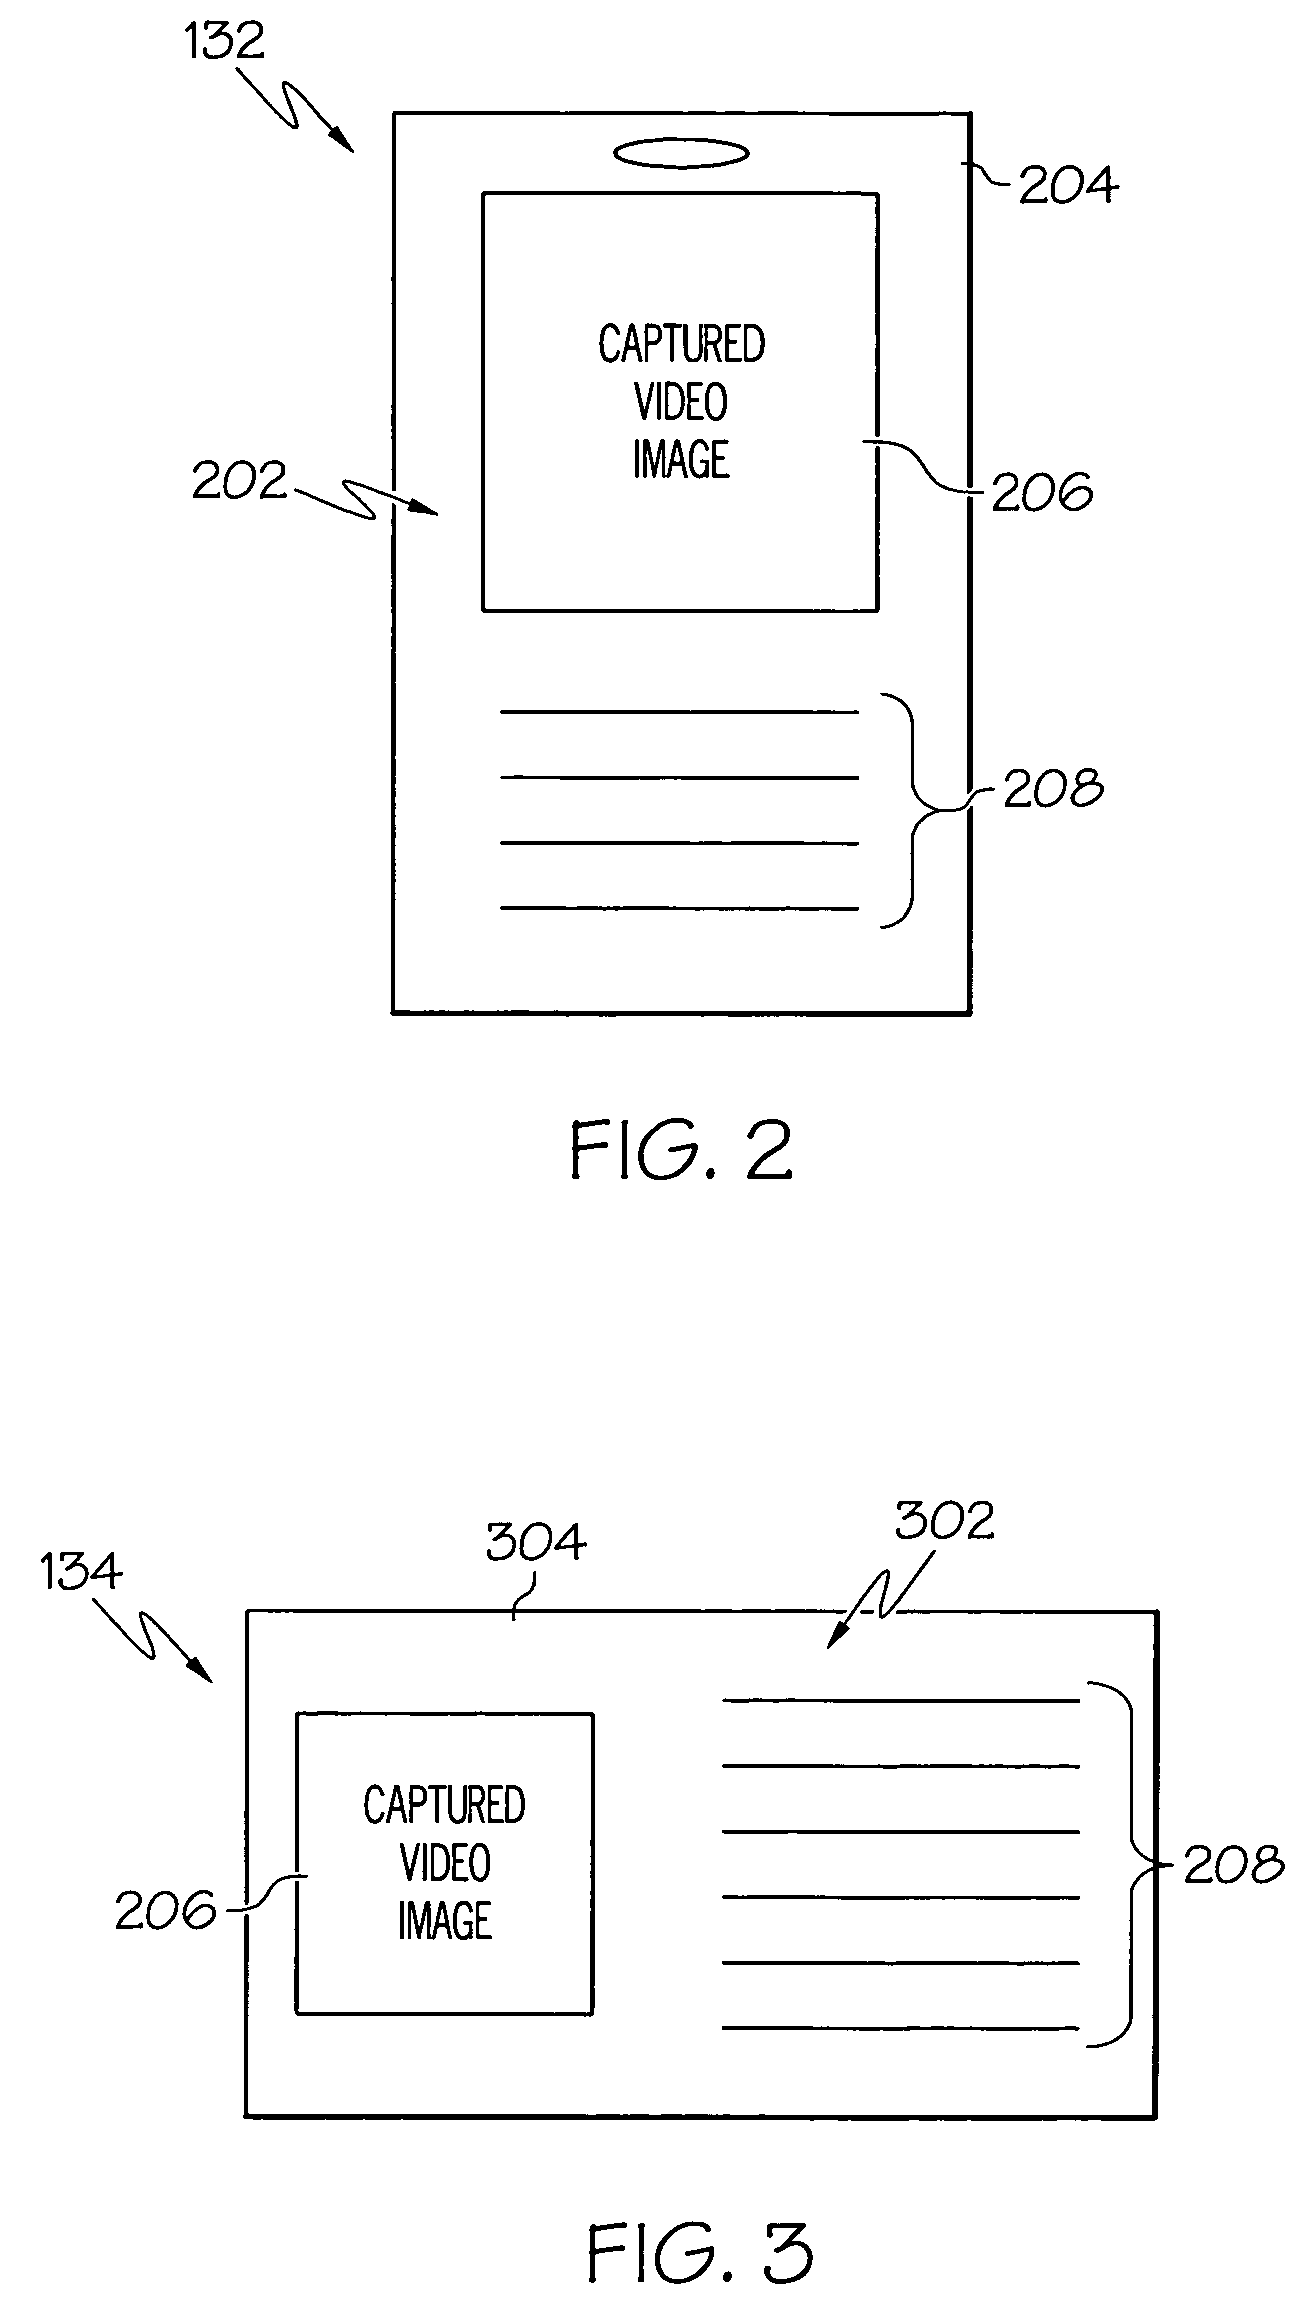 Visitor badge and visitor business card photo identification system and method